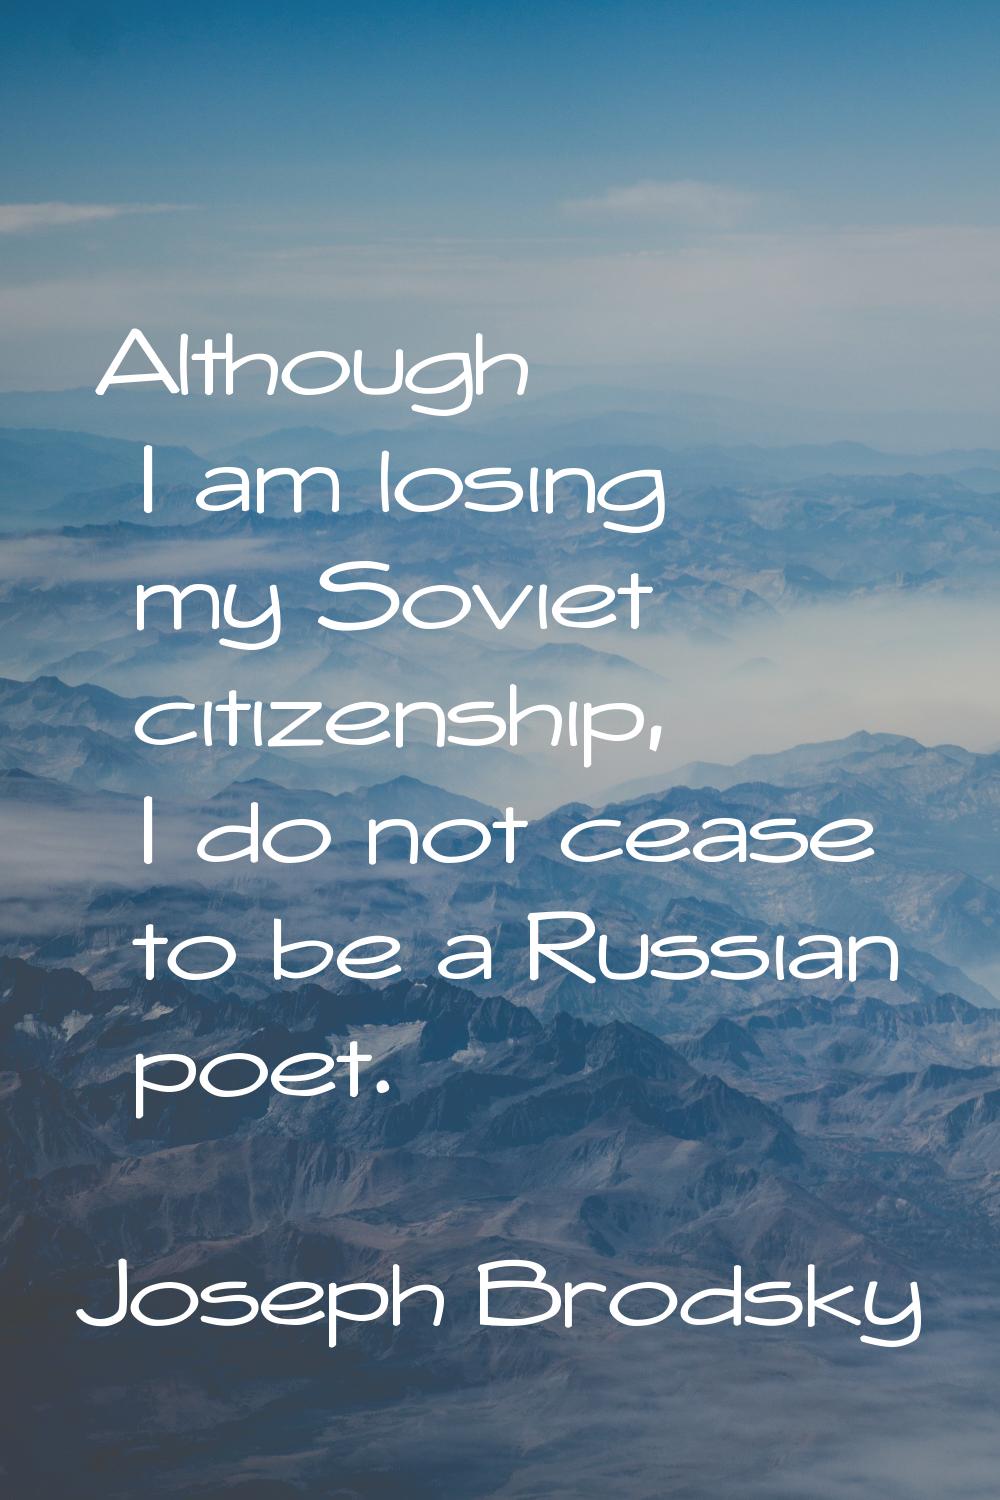 Although I am losing my Soviet citizenship, I do not cease to be a Russian poet.